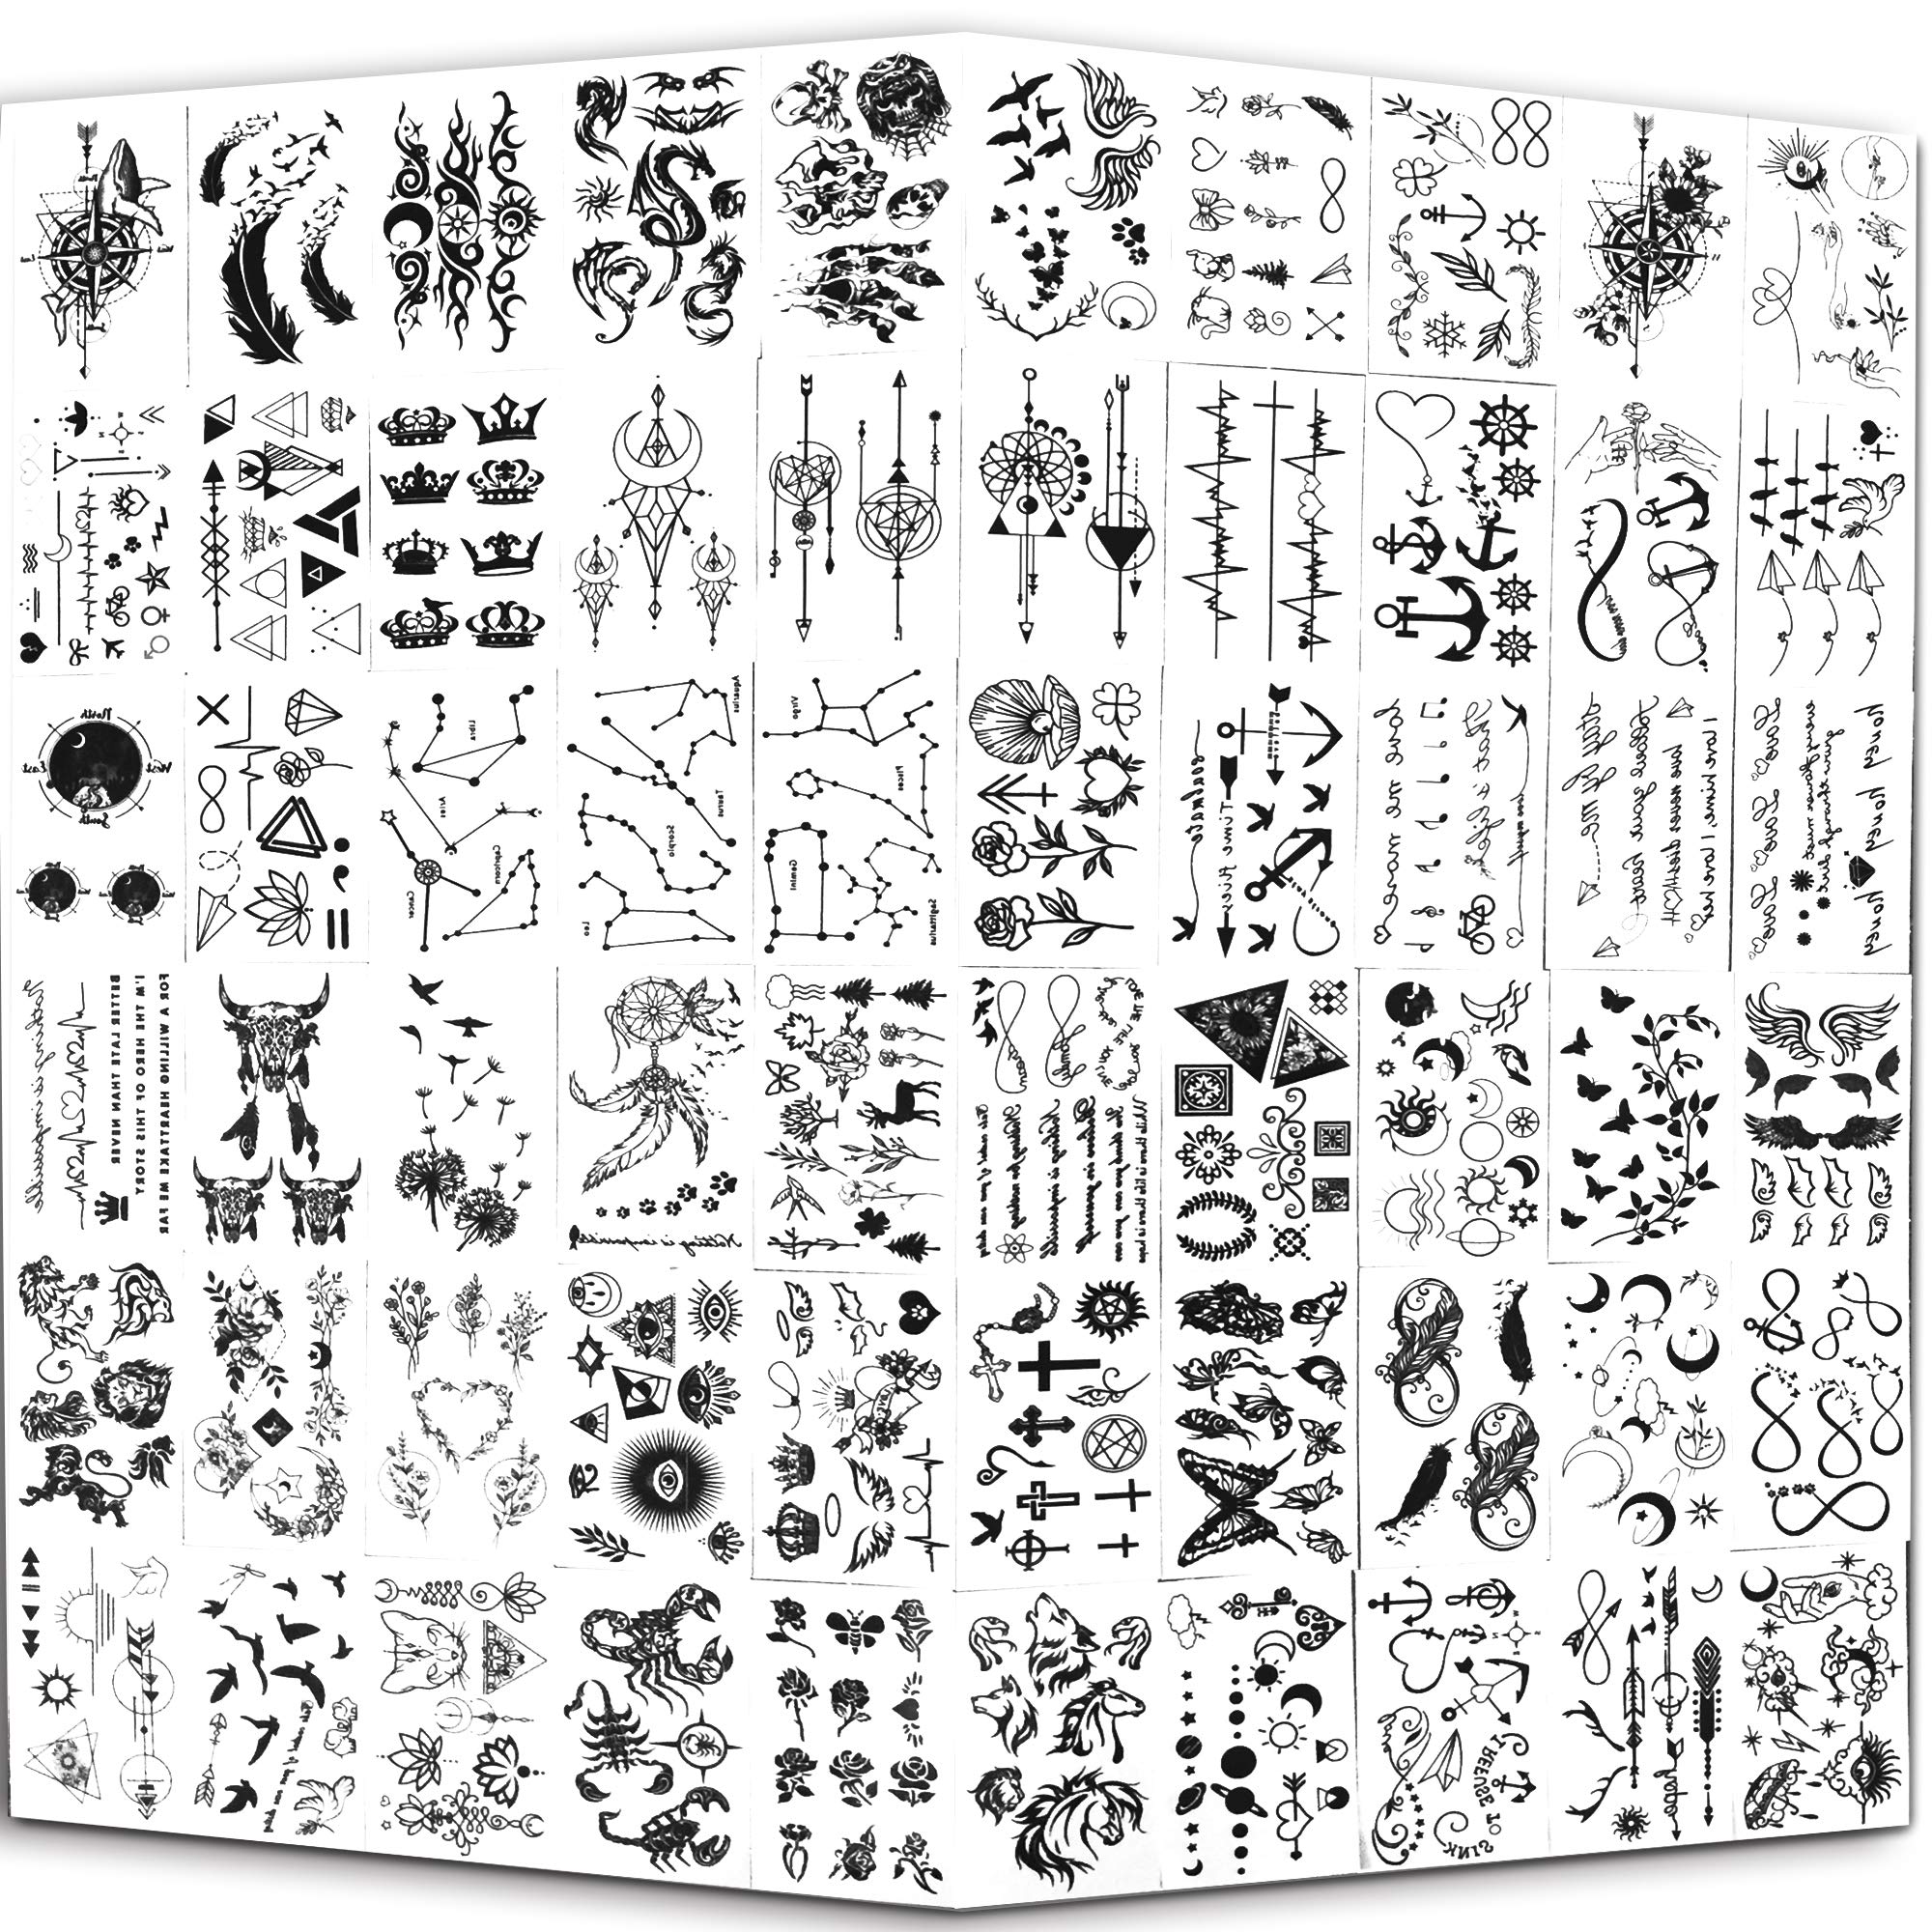 Yazhiji Tiny Waterproof Temporary Tattoos - 60 Sheets, Moon Stars Constellations Music Compass Anchor Words Lines Flowers for Kids Adults Men and Women